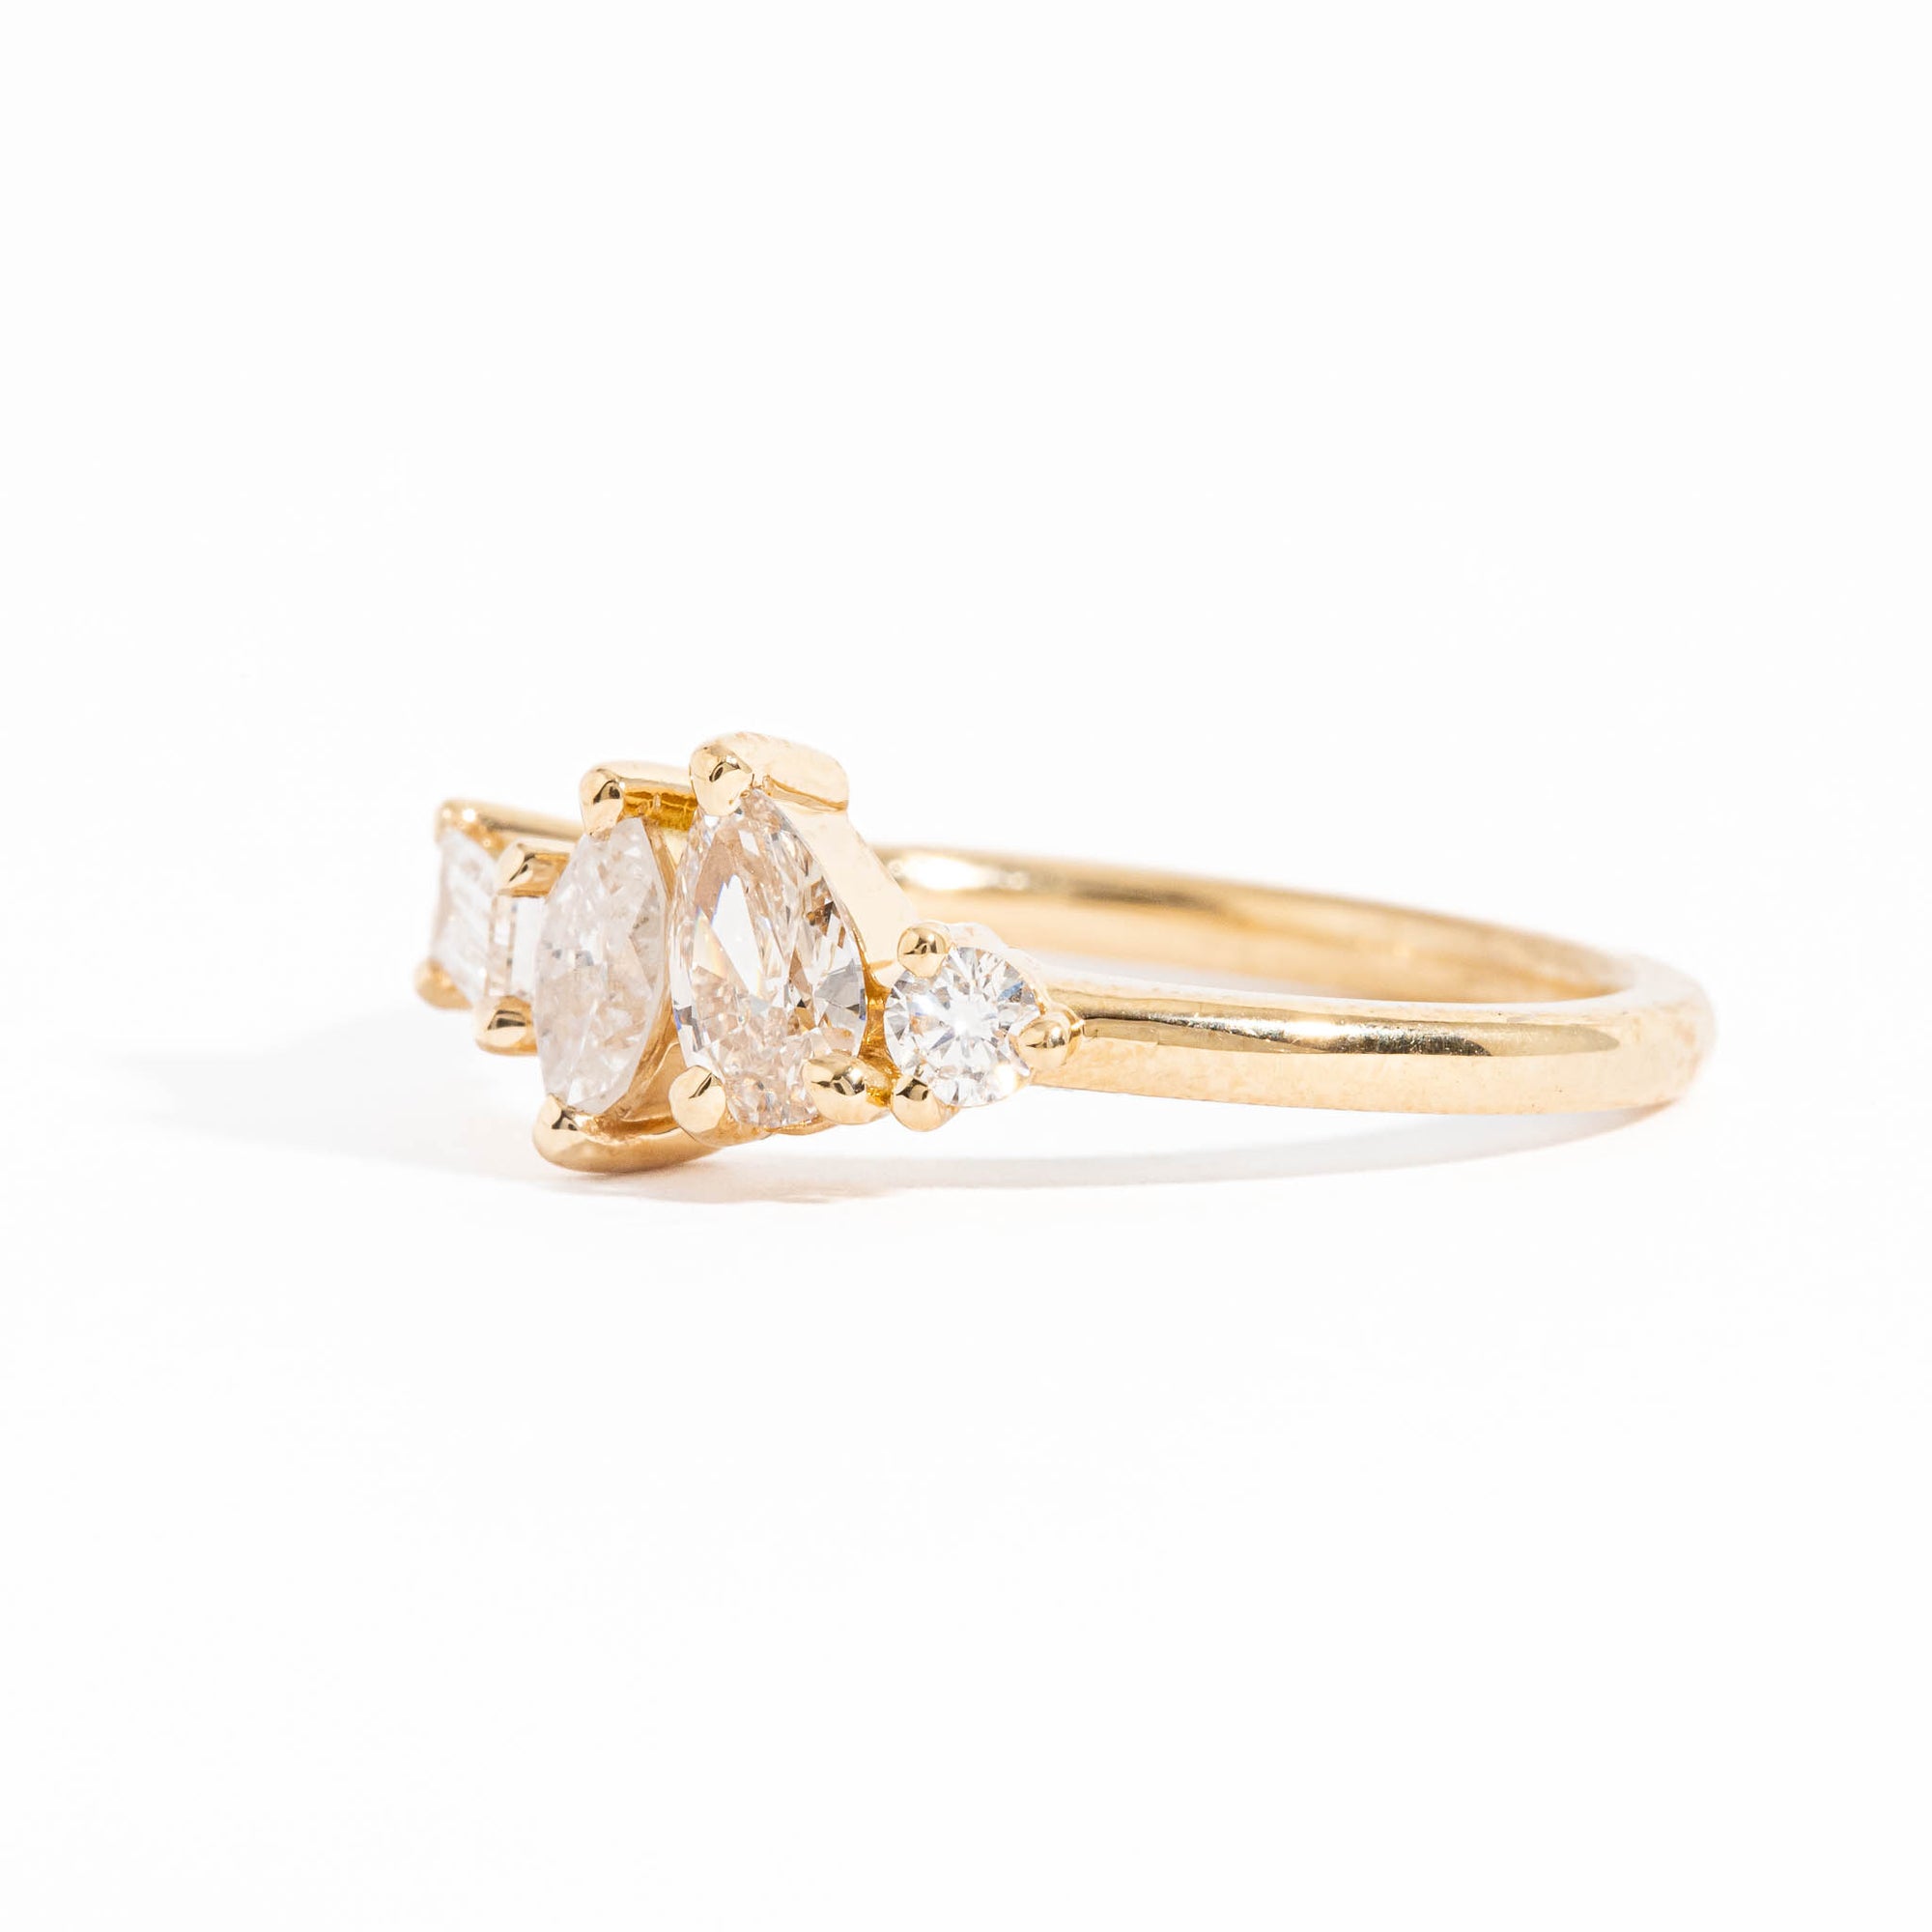 Four Stone Pear Cut, Marquise Cut, Baguette Cut White Diamond Engagement Ring in 18 Carat Yellow Gold